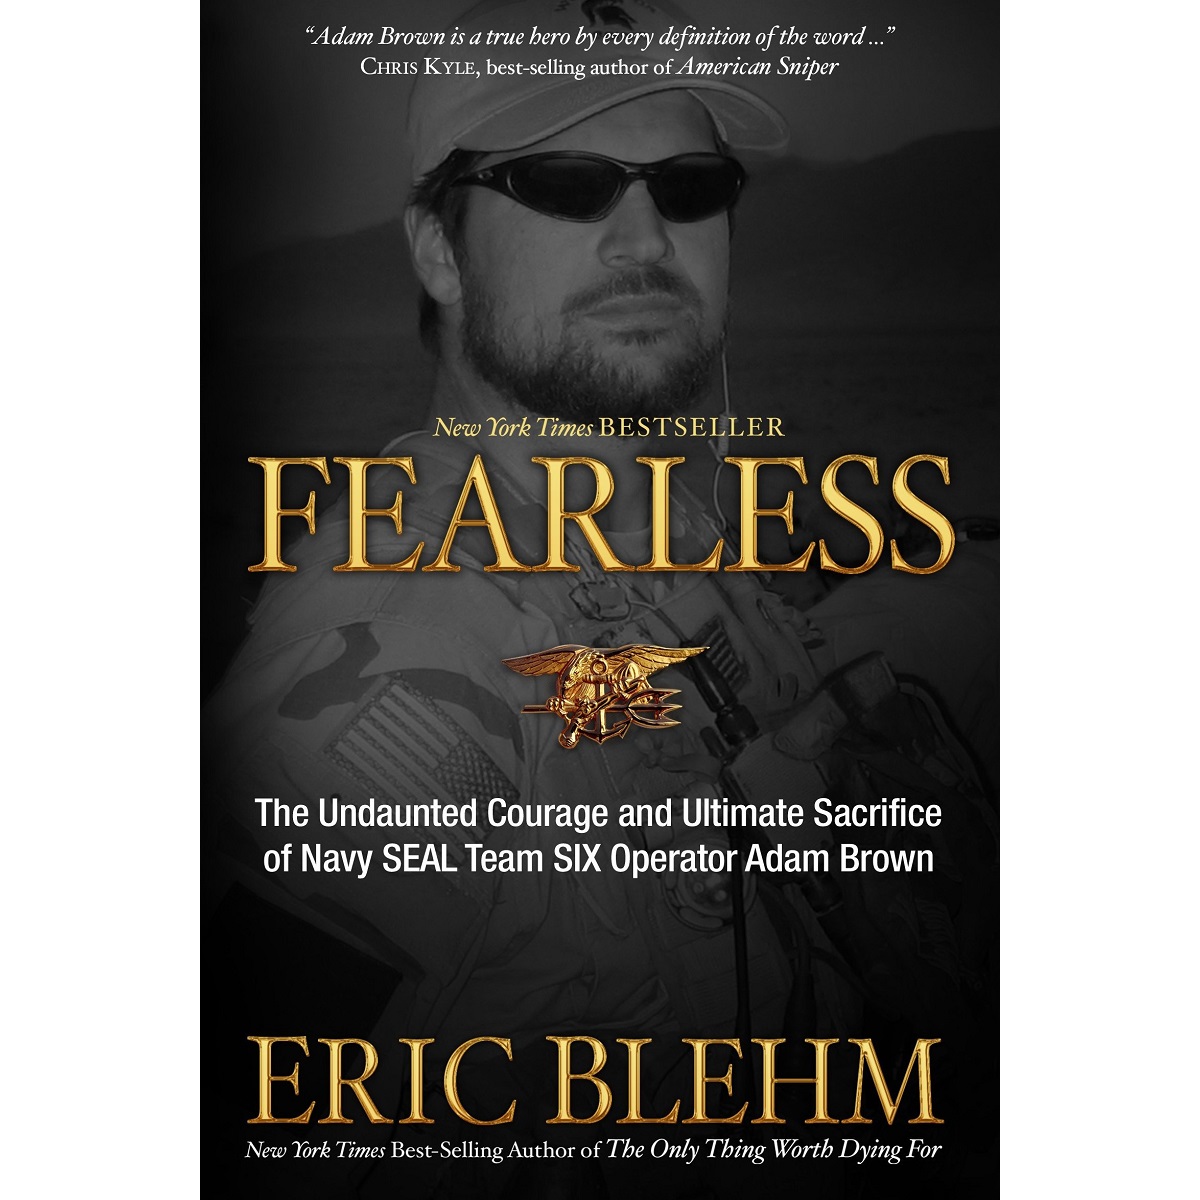 Fearless by Eric Blehm